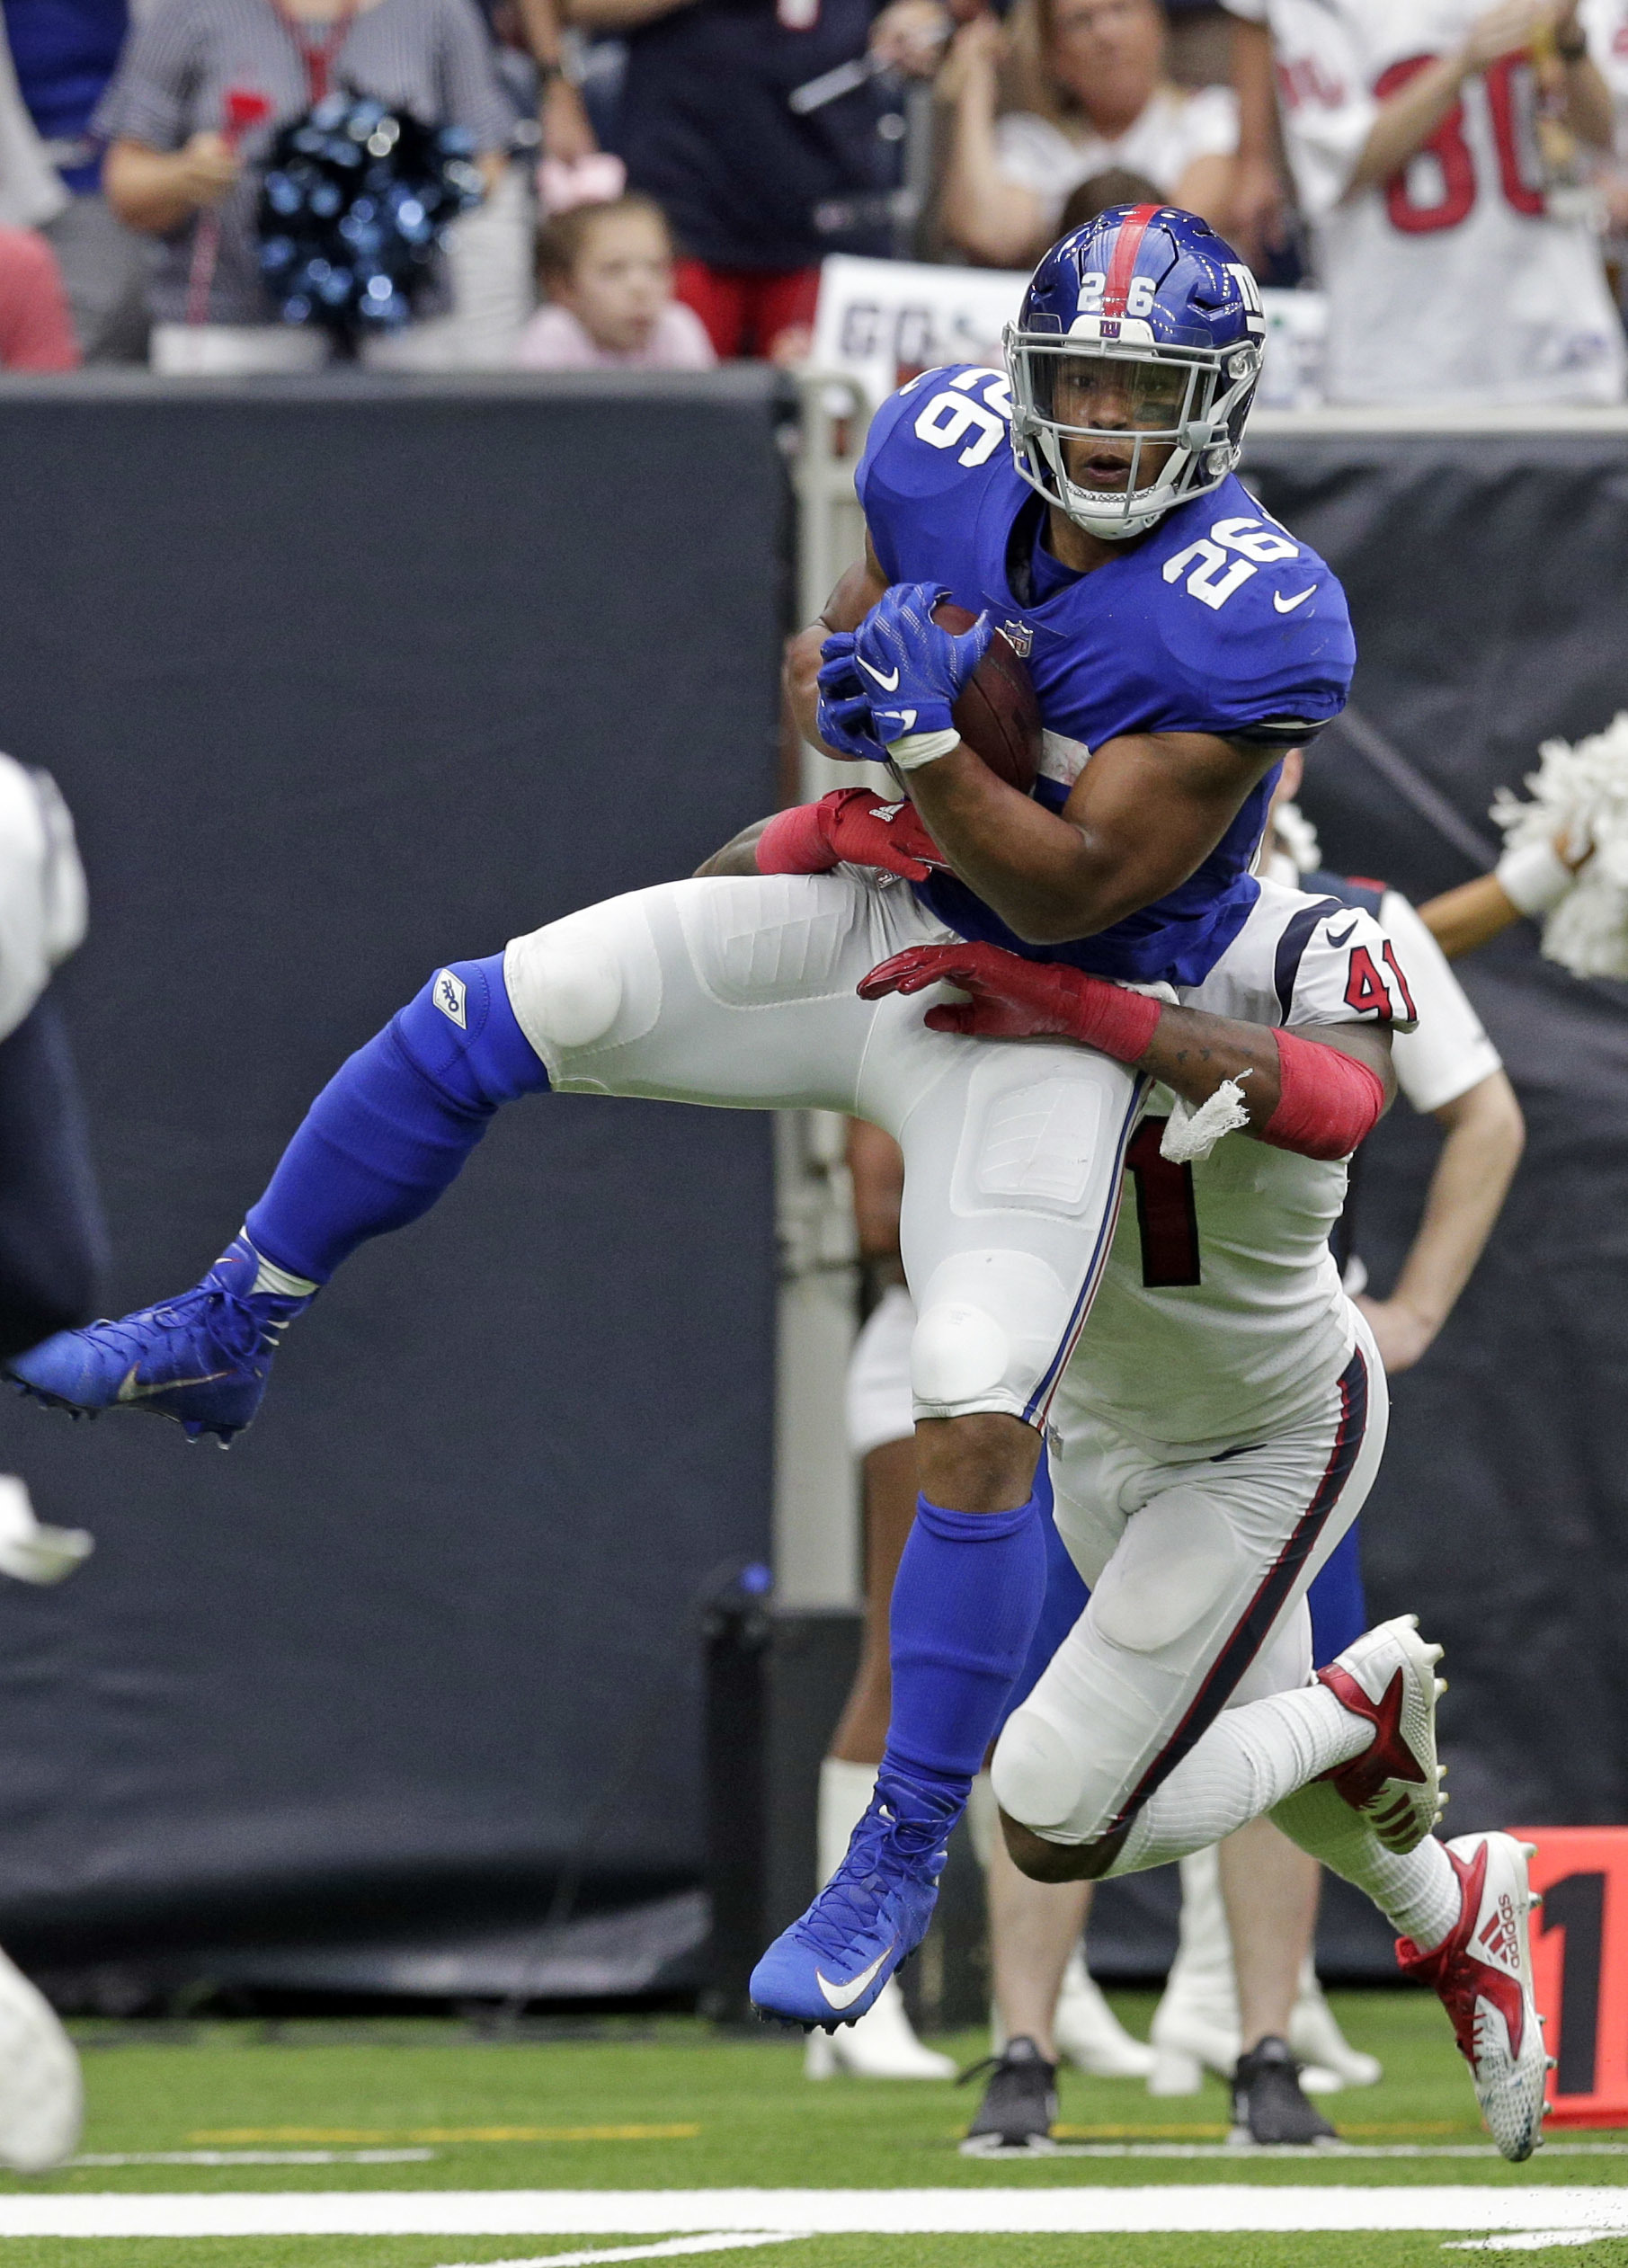 Giants finally finish a game to get 27-22 win over Texans